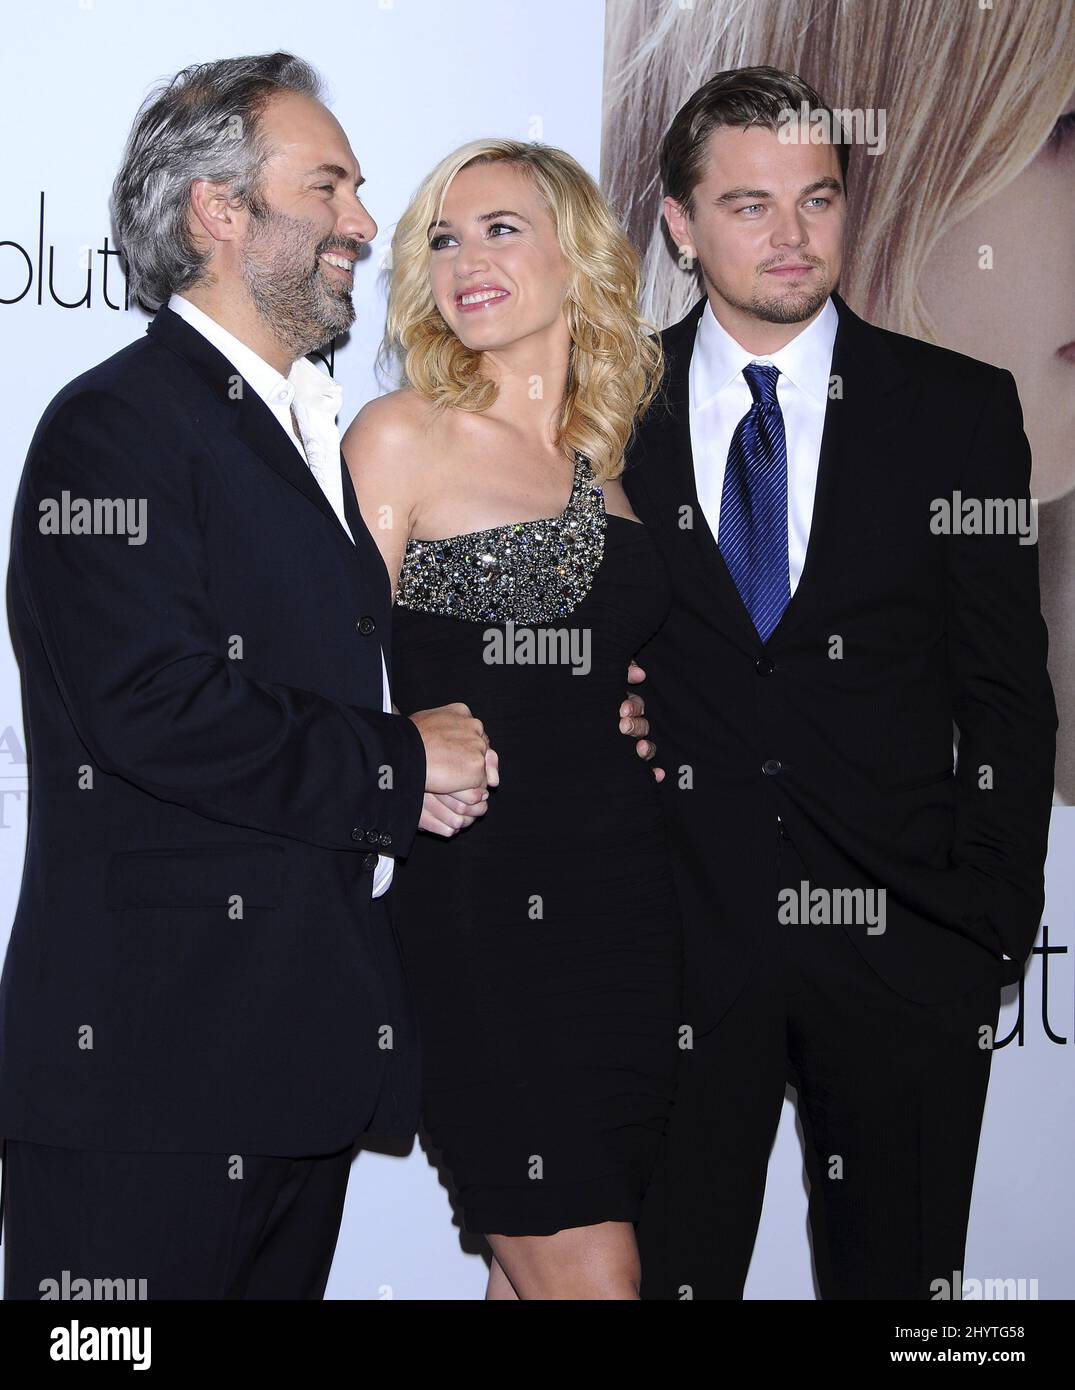 Sam Mendes, Kate Winslet and Leonardo DiCaprio attending the "Revolutionary Road" premiere held at the Mann Village Theater in Westwood. Los Stock Photo - Alamy